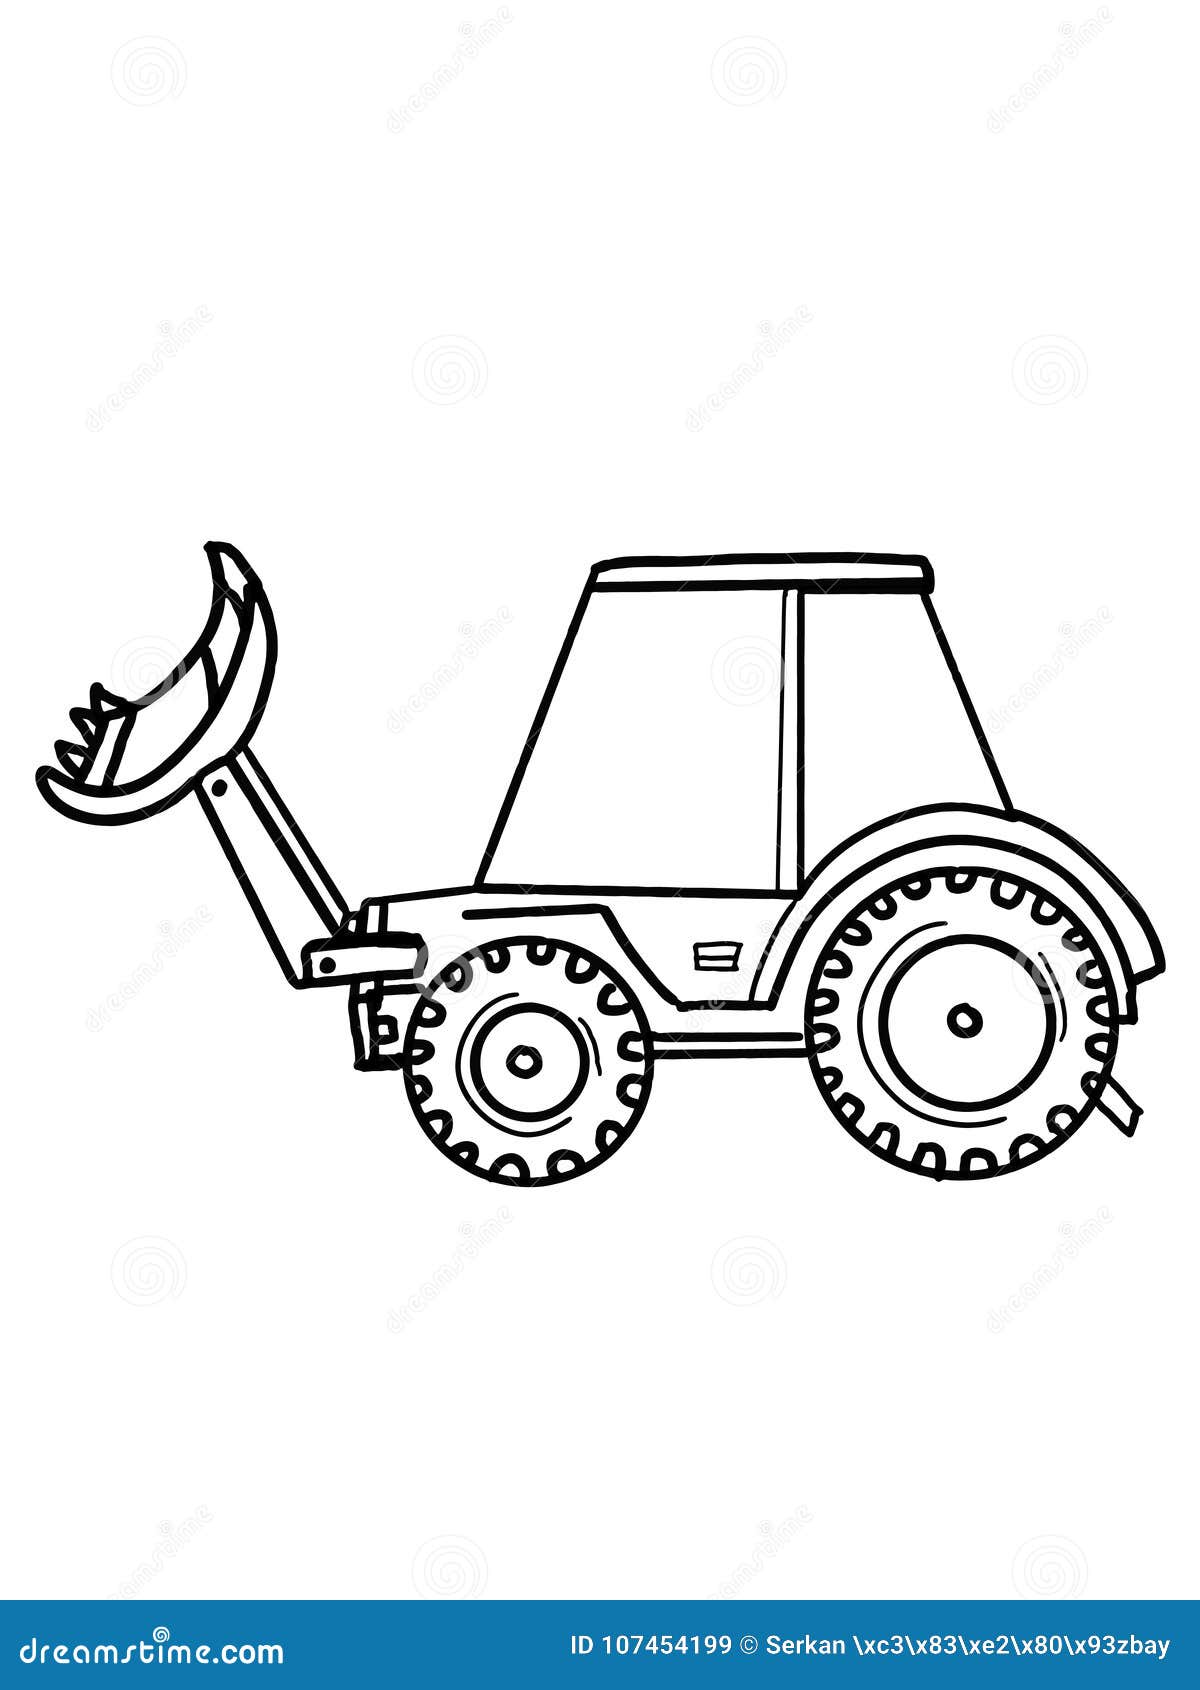 Cute Tractor Truck Construction Vehicle Speaking Vehicle Illustration  Cartoon Dr Illustration Cartoon Drawing and White Background Stock  Illustration - Illustration of agriculture, background: 107454199